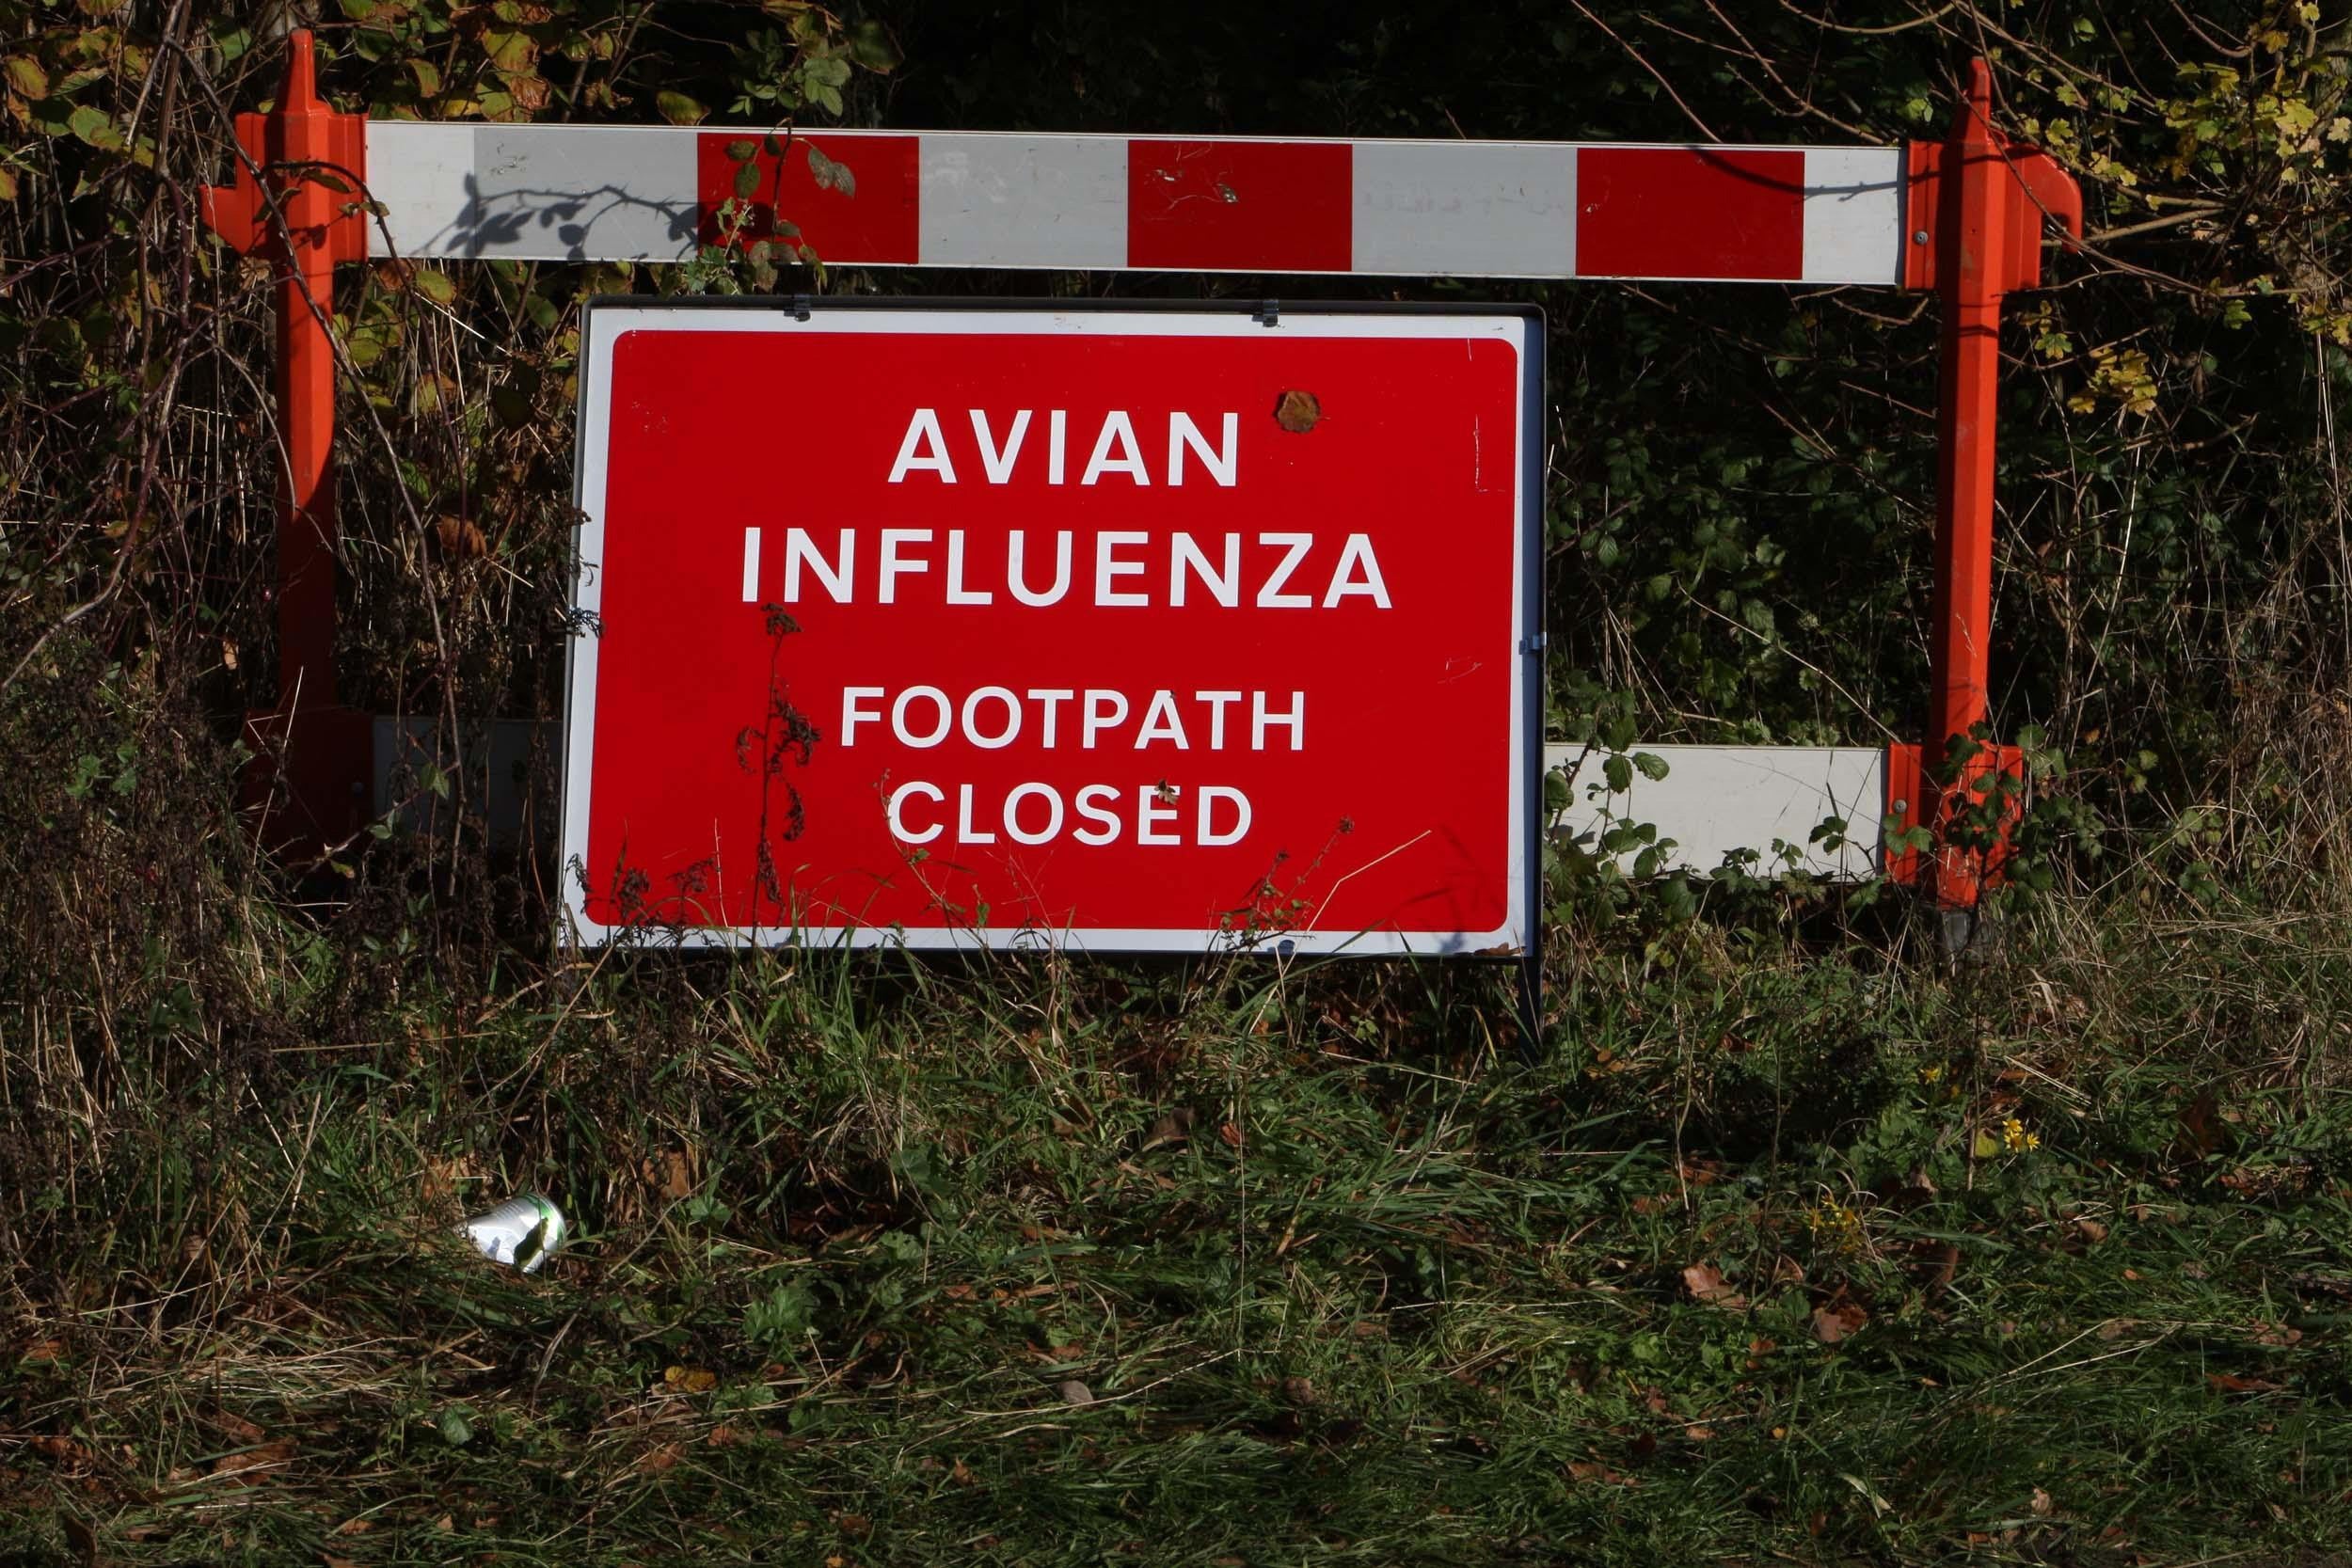 The UK is in the middle of its largest ever outbreak of the H5N1 virus. It is not yet clear whether the human infection is the same strain